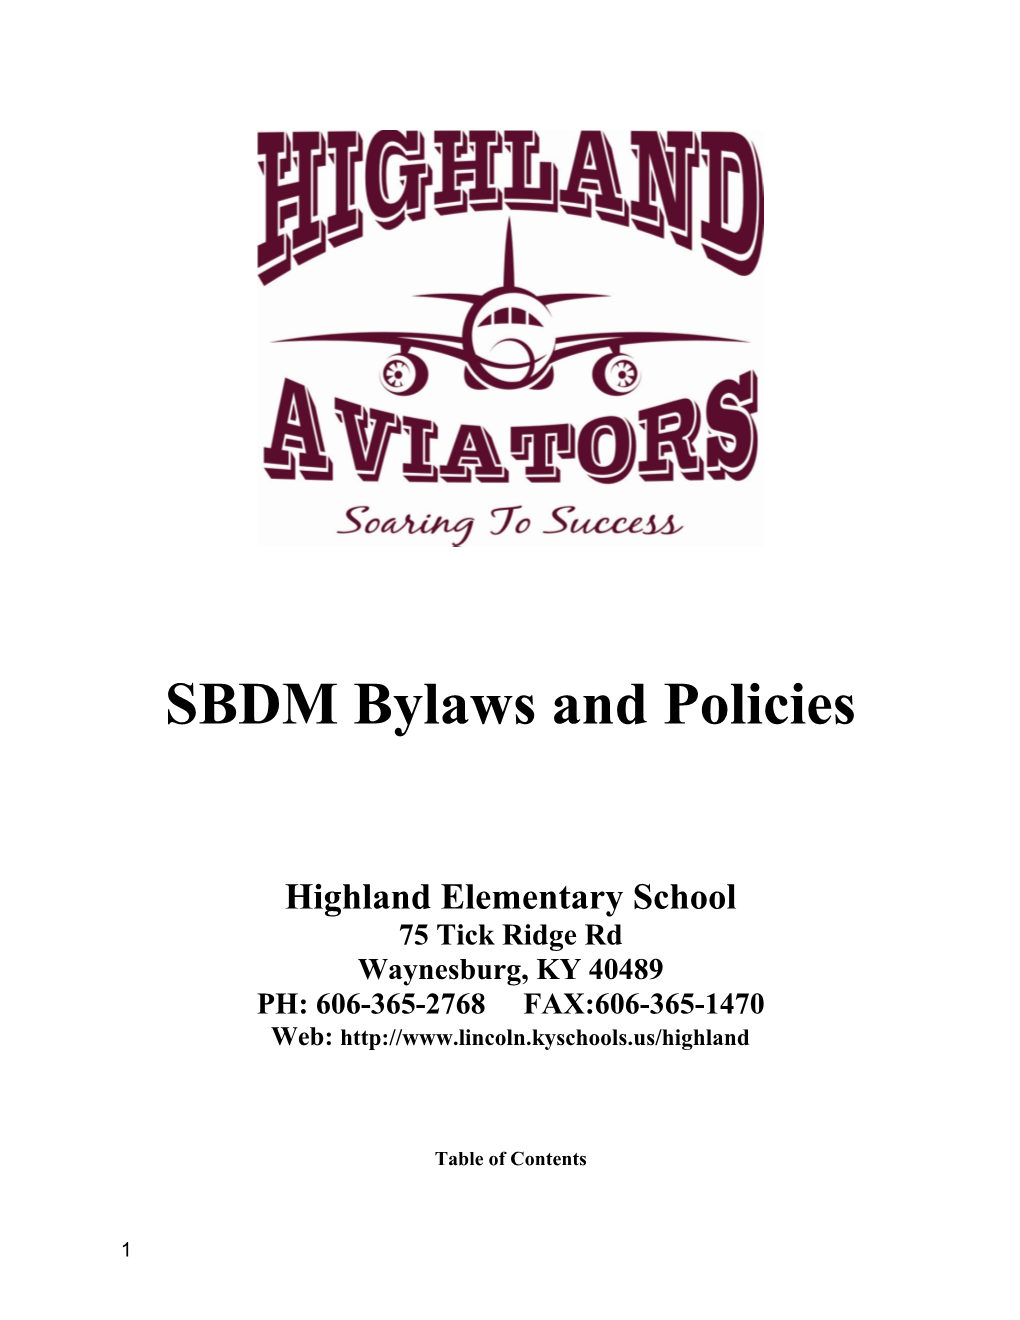 SBDM Bylaws and Policies